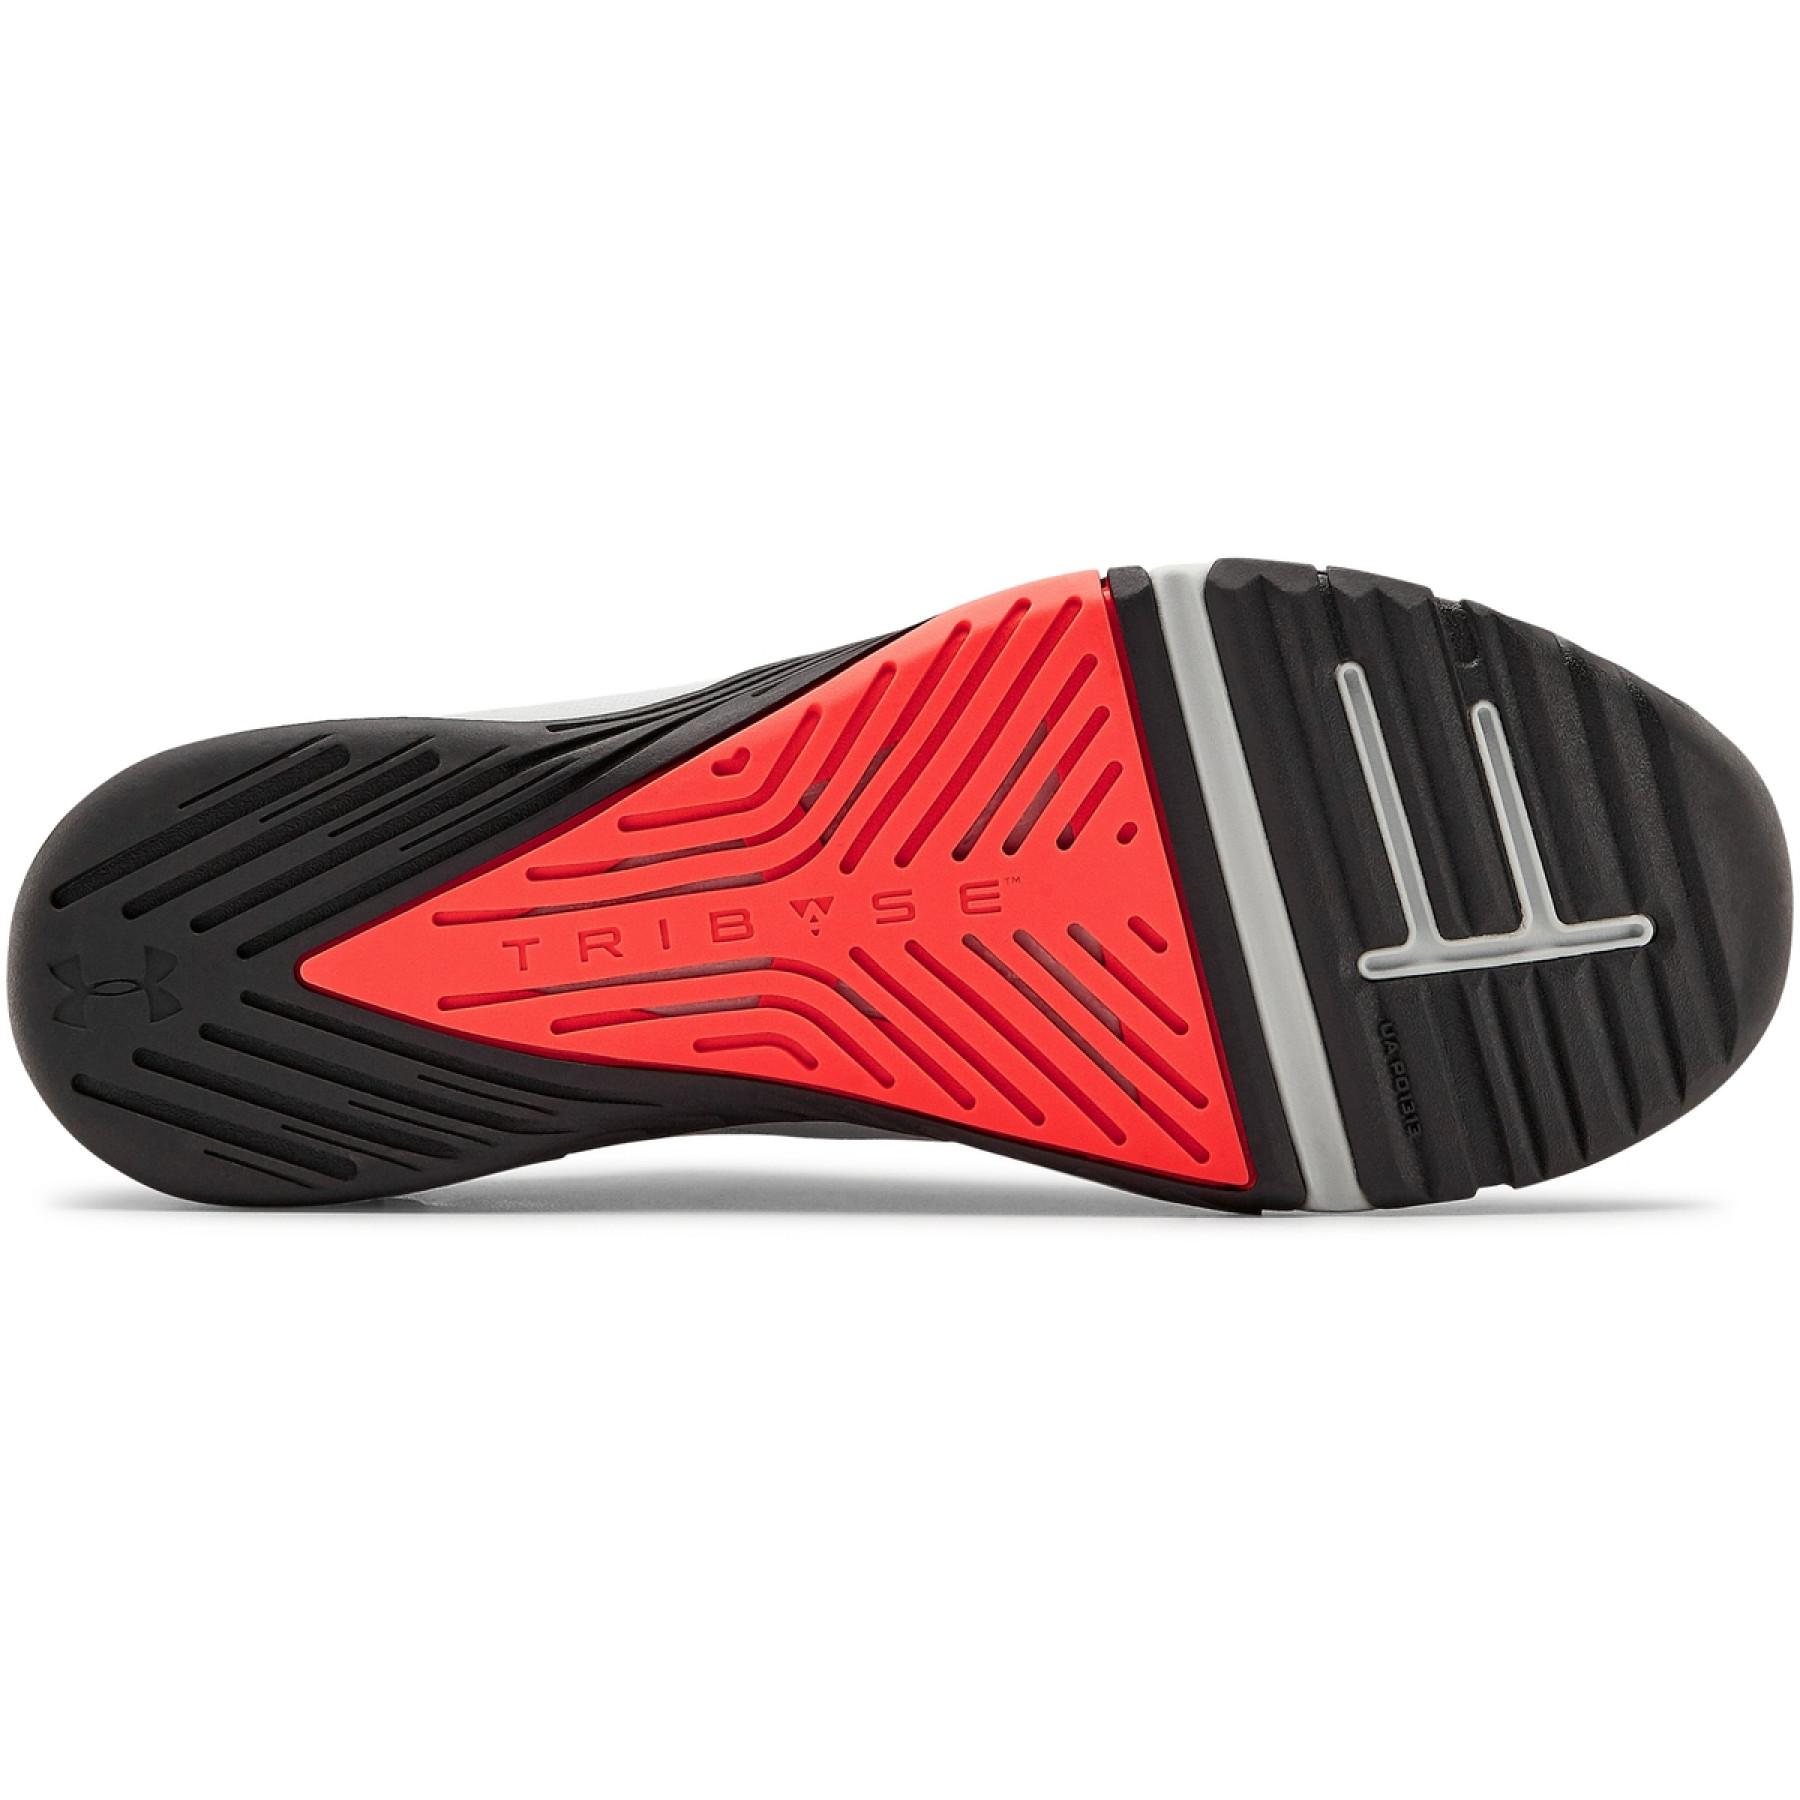 Buty treningowe Under Armour TriBase Reign 2